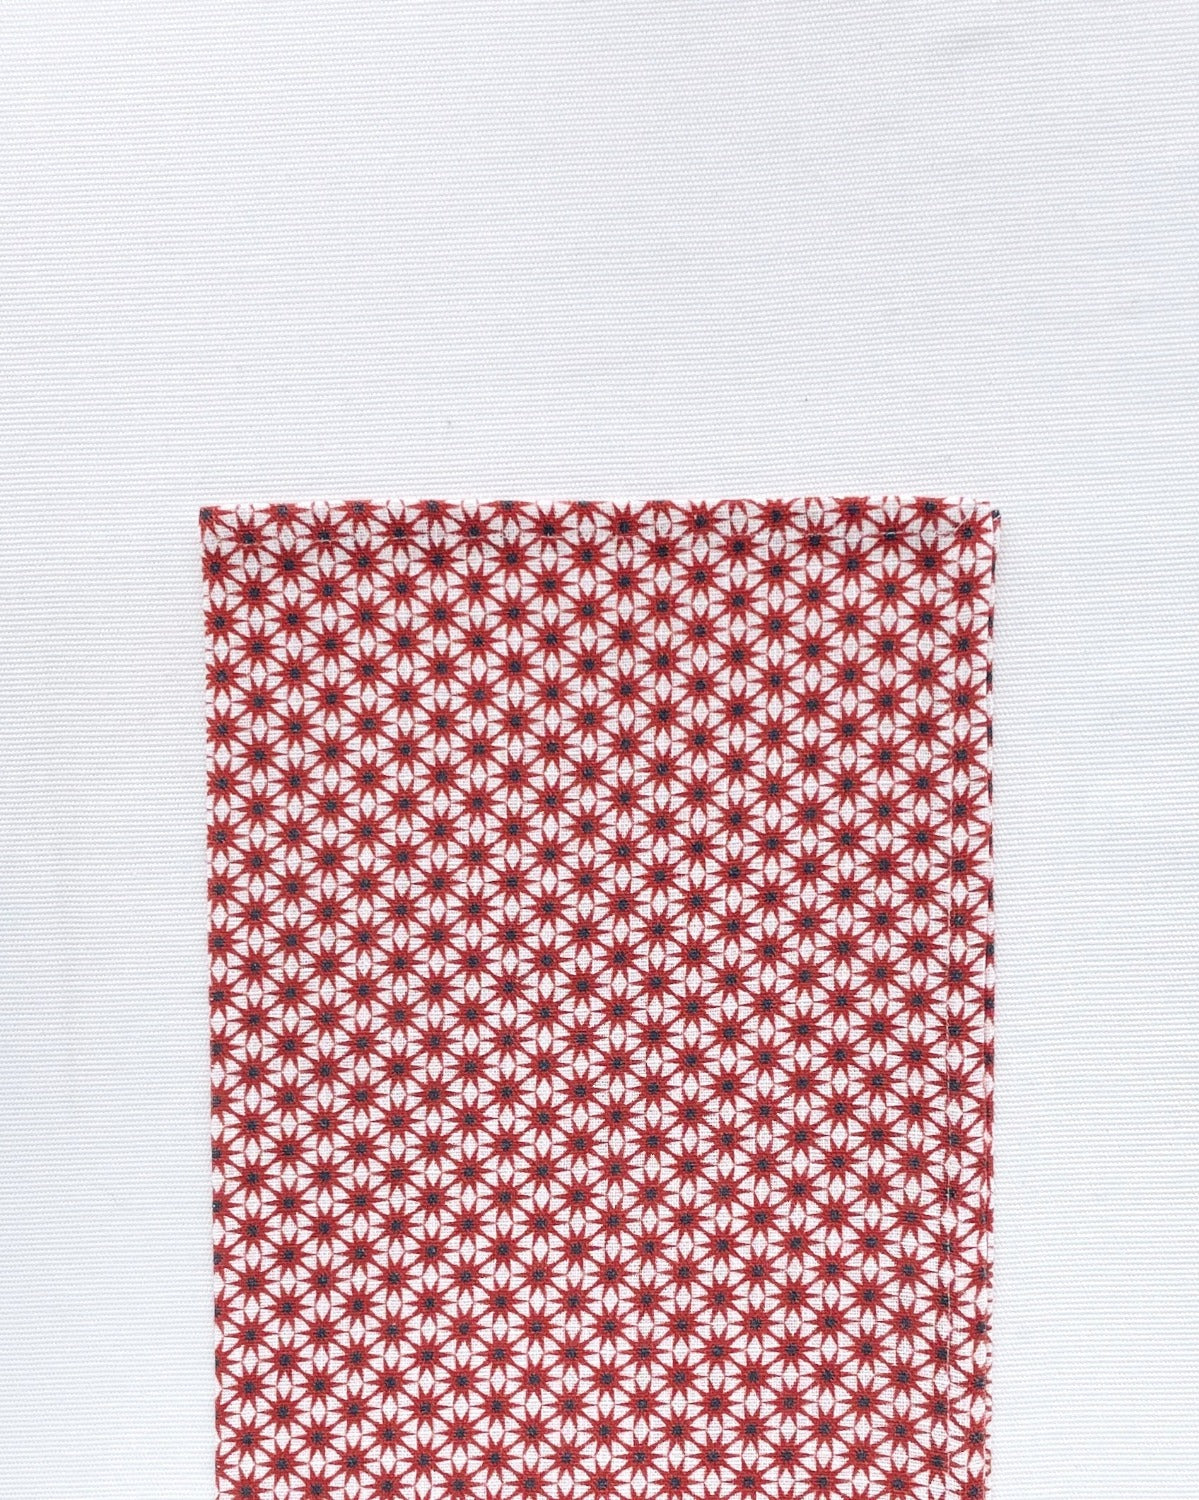 Flat lay of Starburst Rust Napkin folded in half on a white background. Napkin is white with a pattern of rust starburst laid out on top of the white hemp-linen blended material.